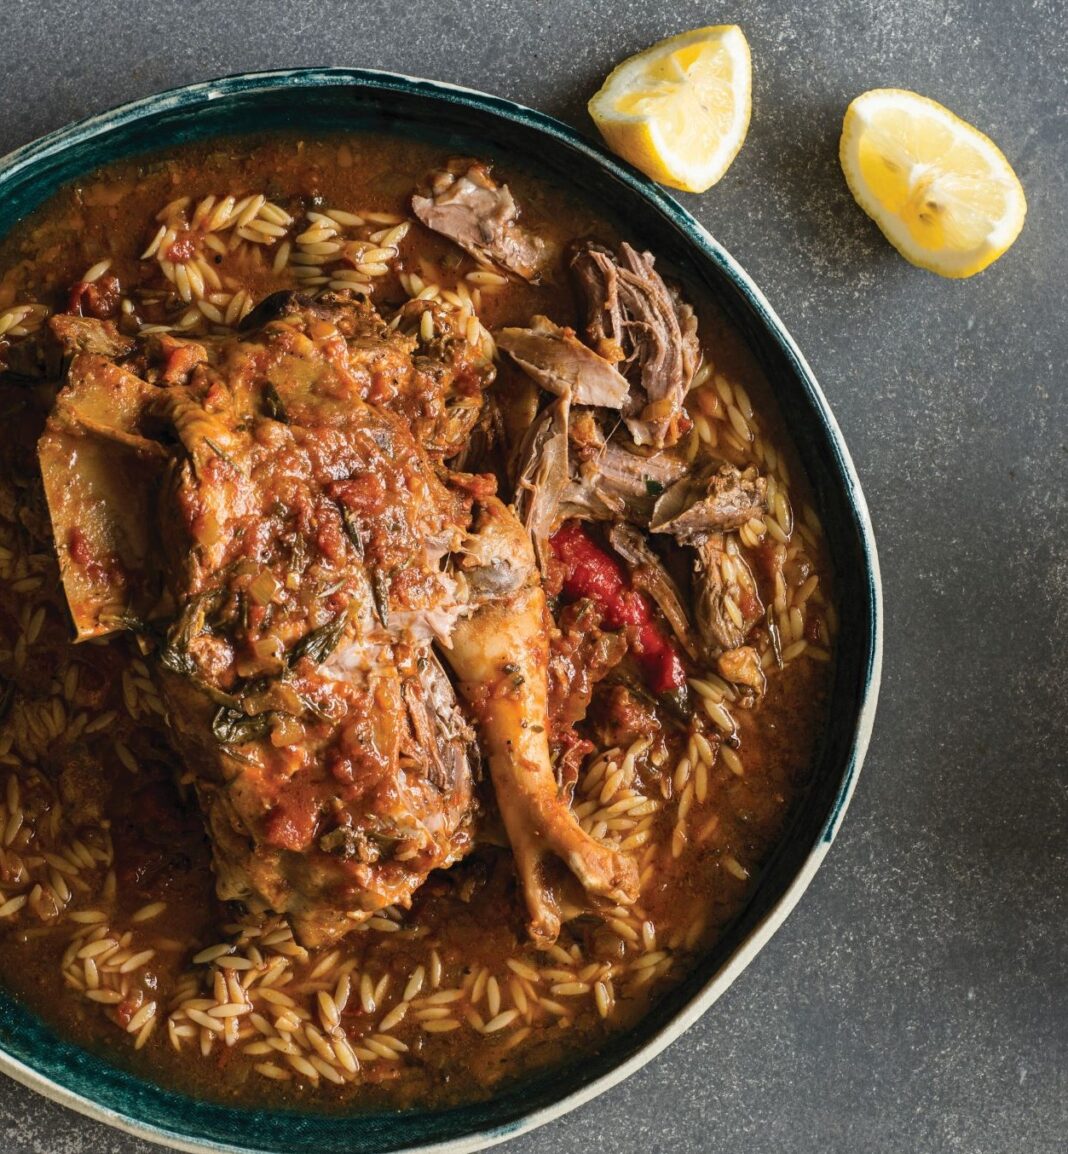 Vince’s slow-roasted lamb shoulder with paprika and honey